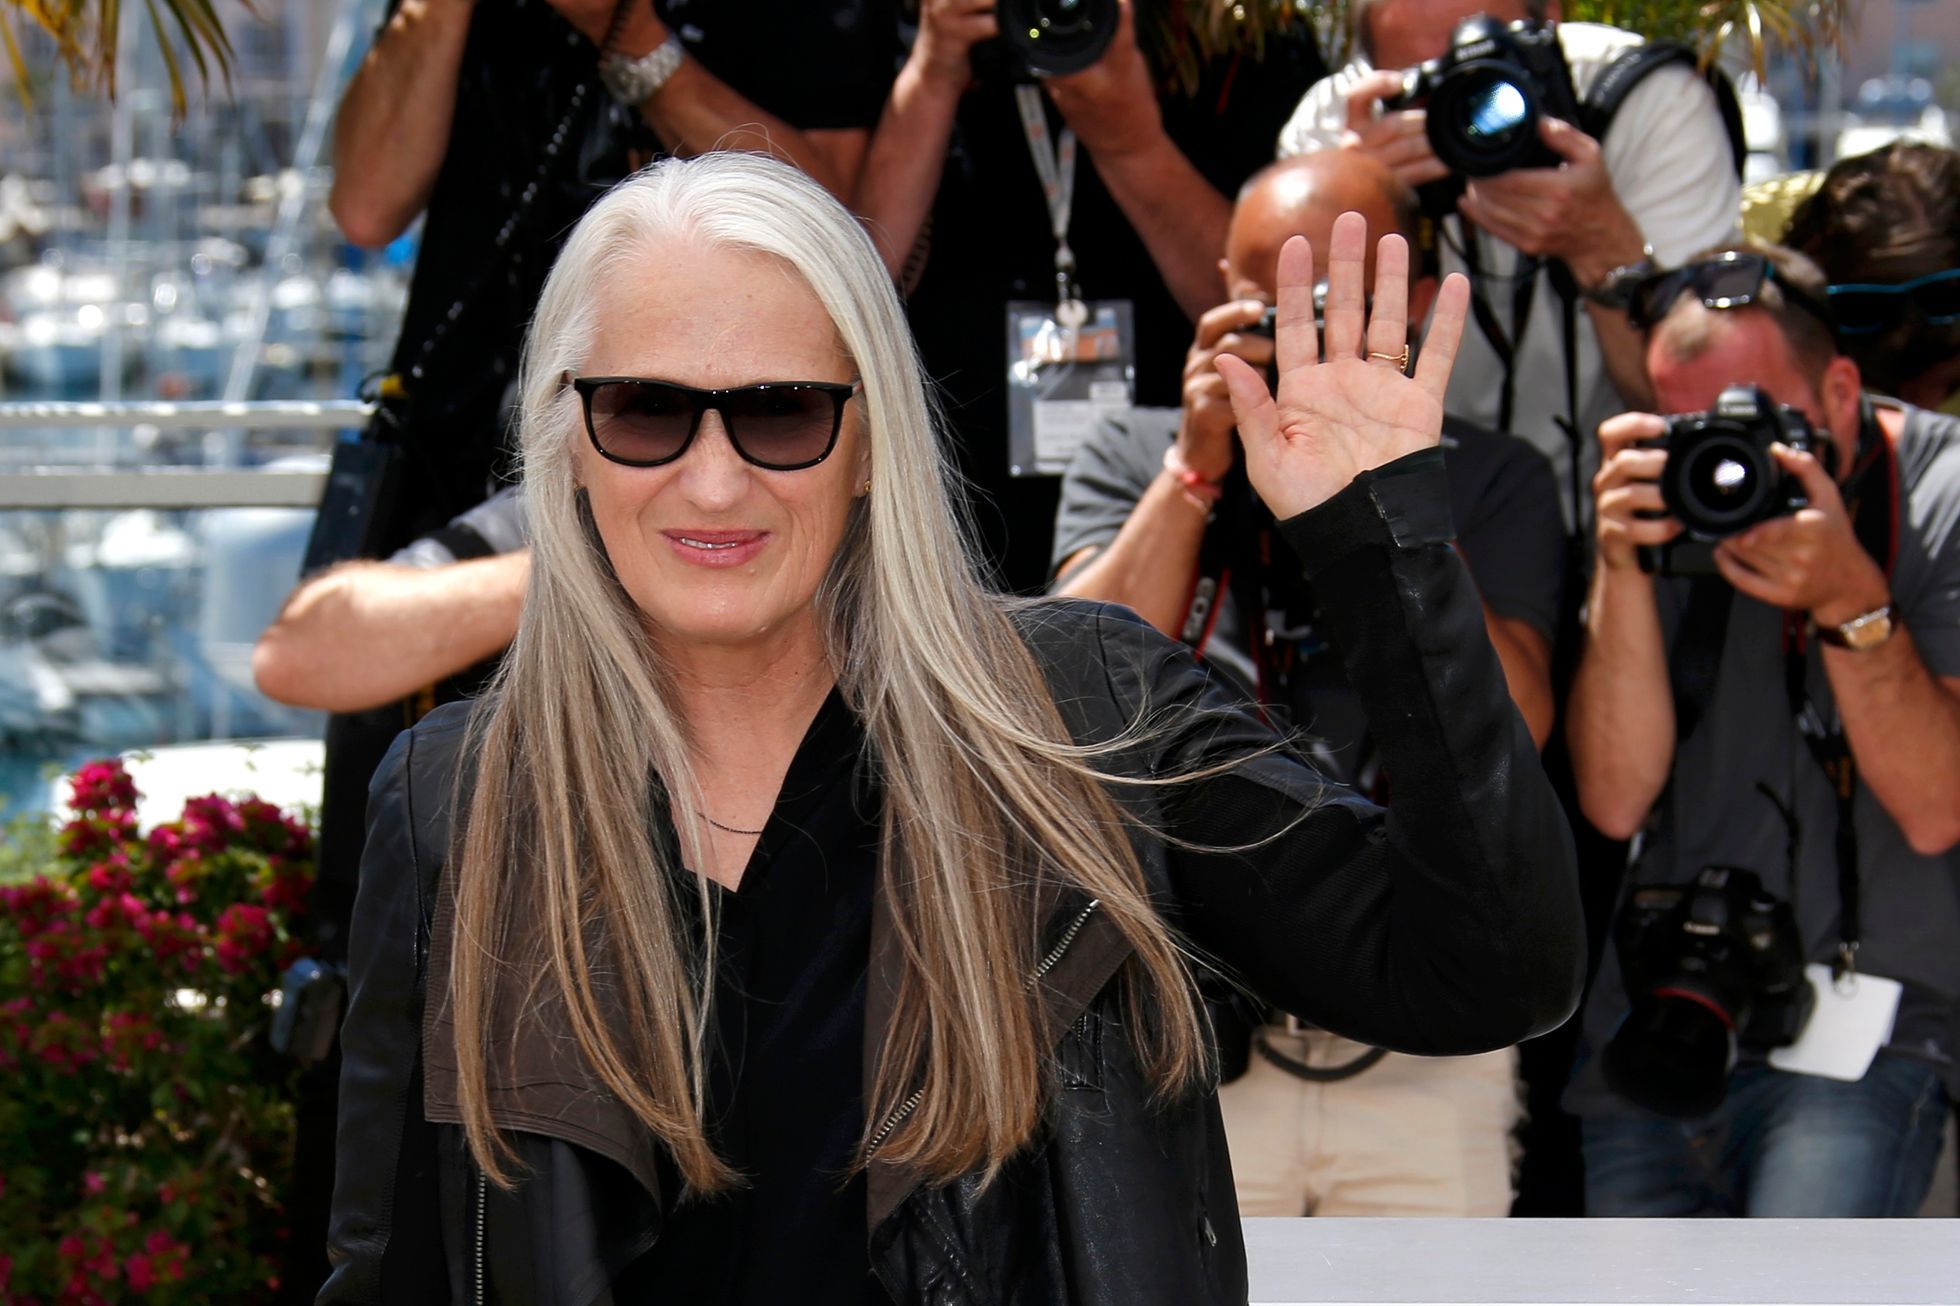 Director Jane Campion, Jury President of the 67th Cannes Film Festival, poses during a photocall before the opening of the Film Festival in Cannes